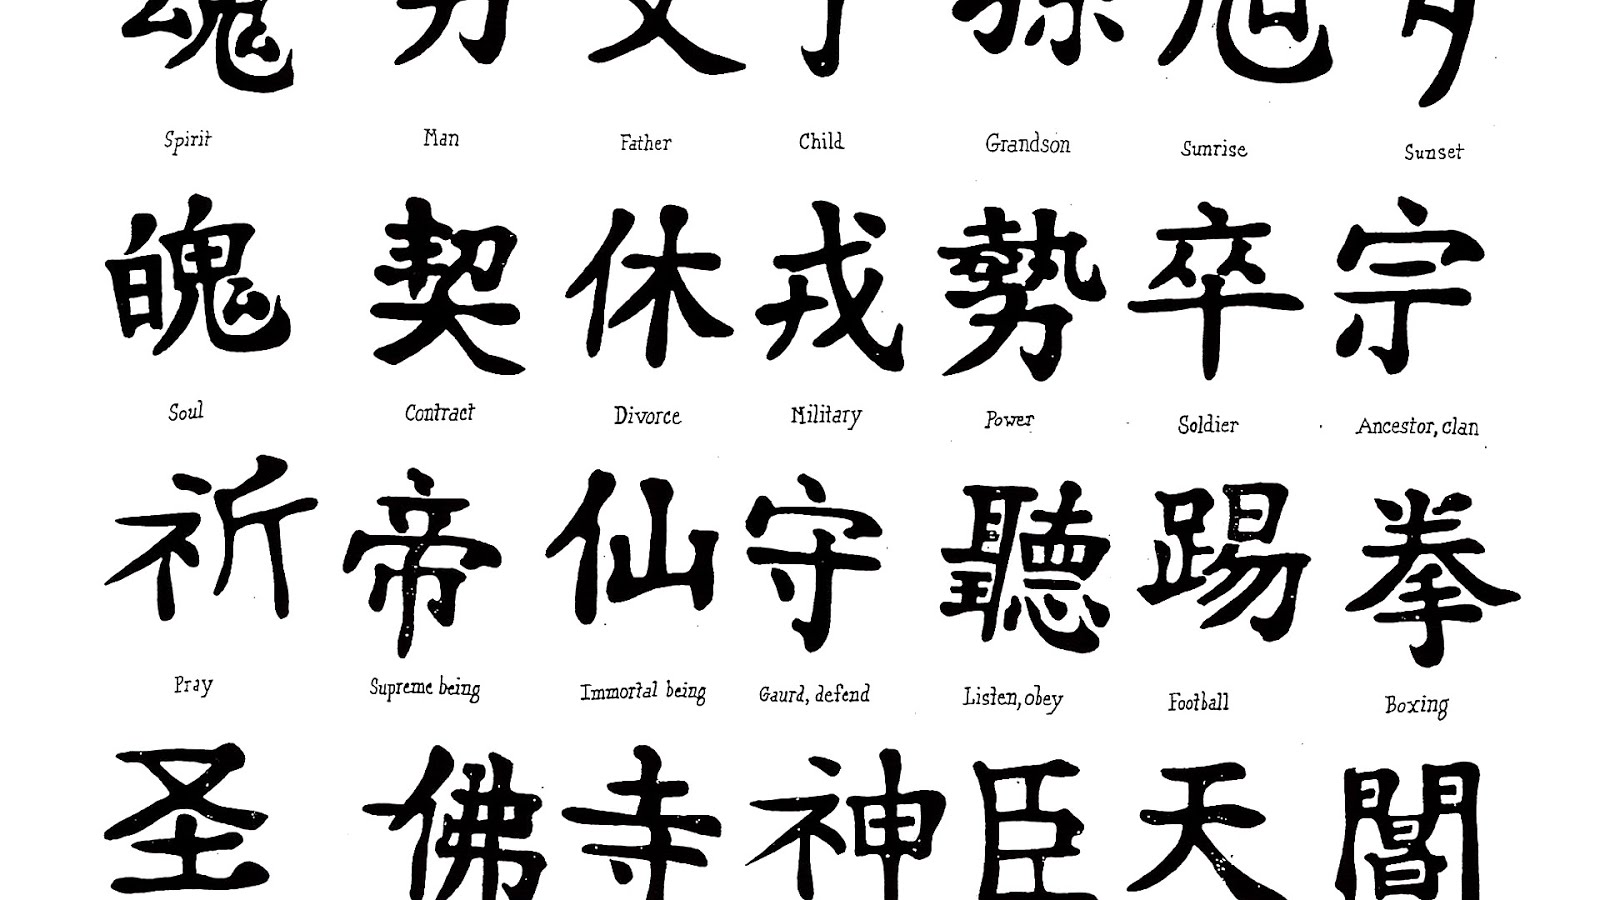 Japanese Calligraphy Symbols - Calligraph Choices